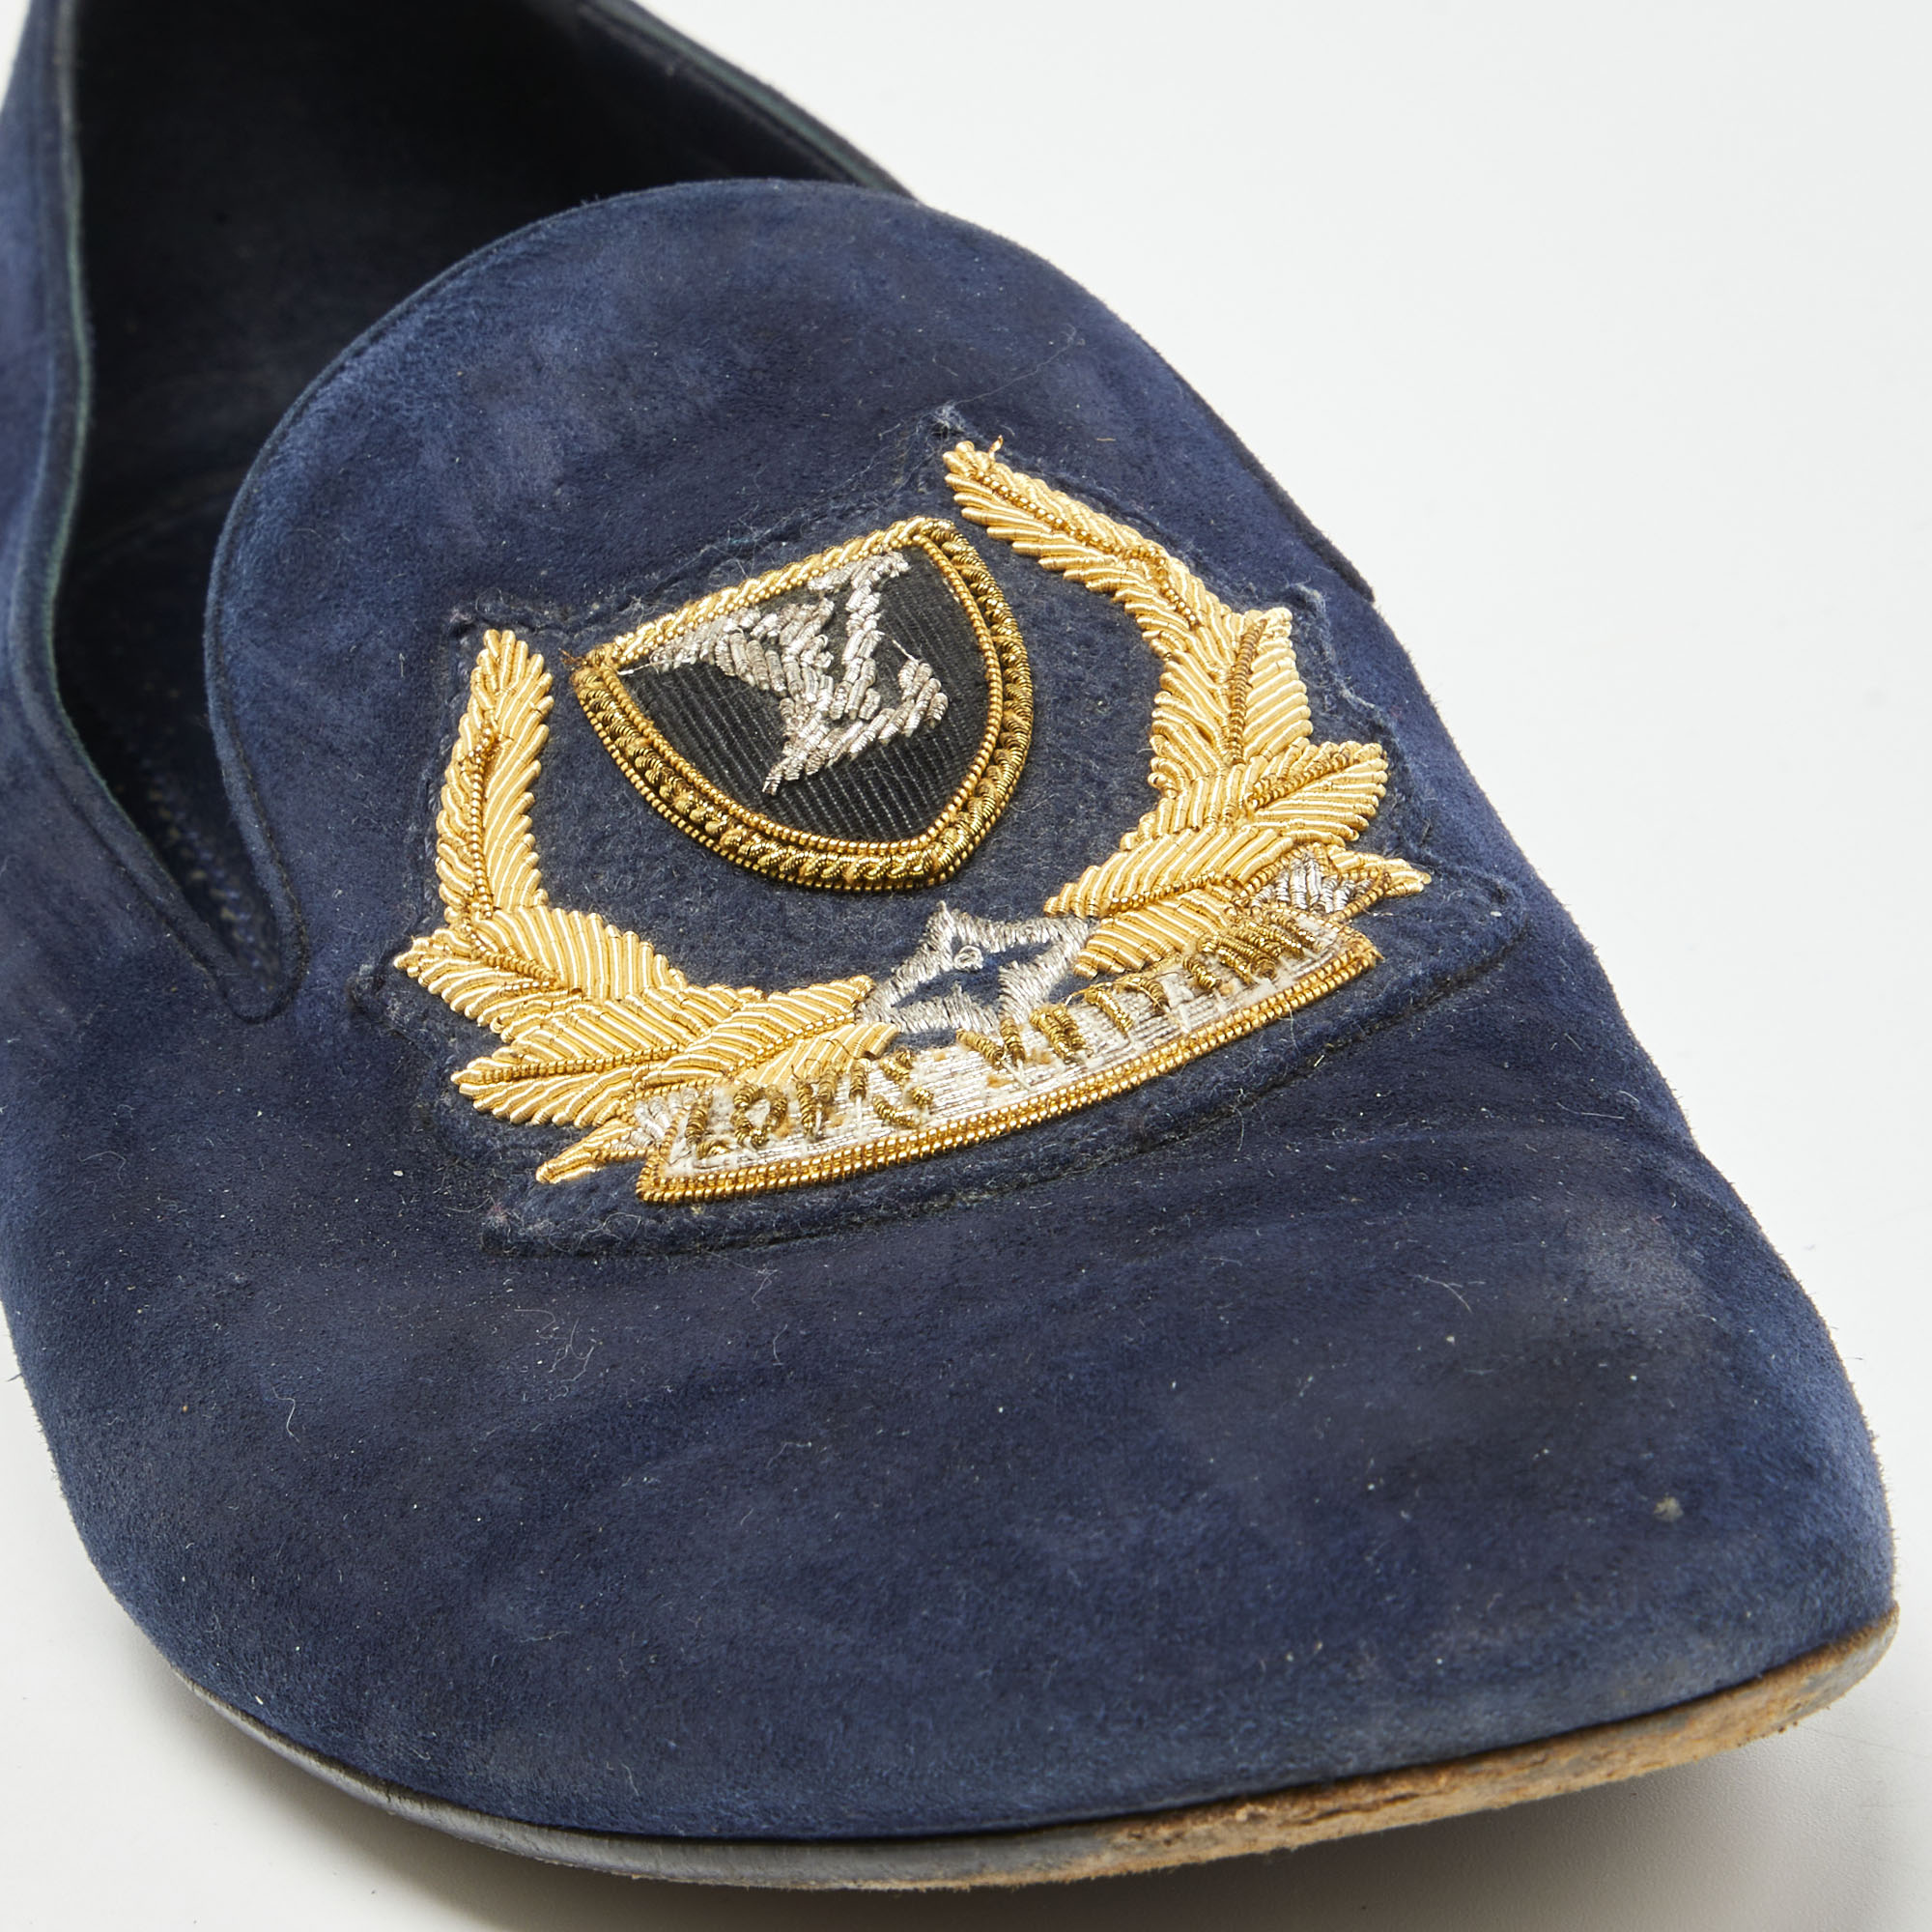 Louis Vuitton Navy Blue Suede Embroidered Smoking Slippers Size 38